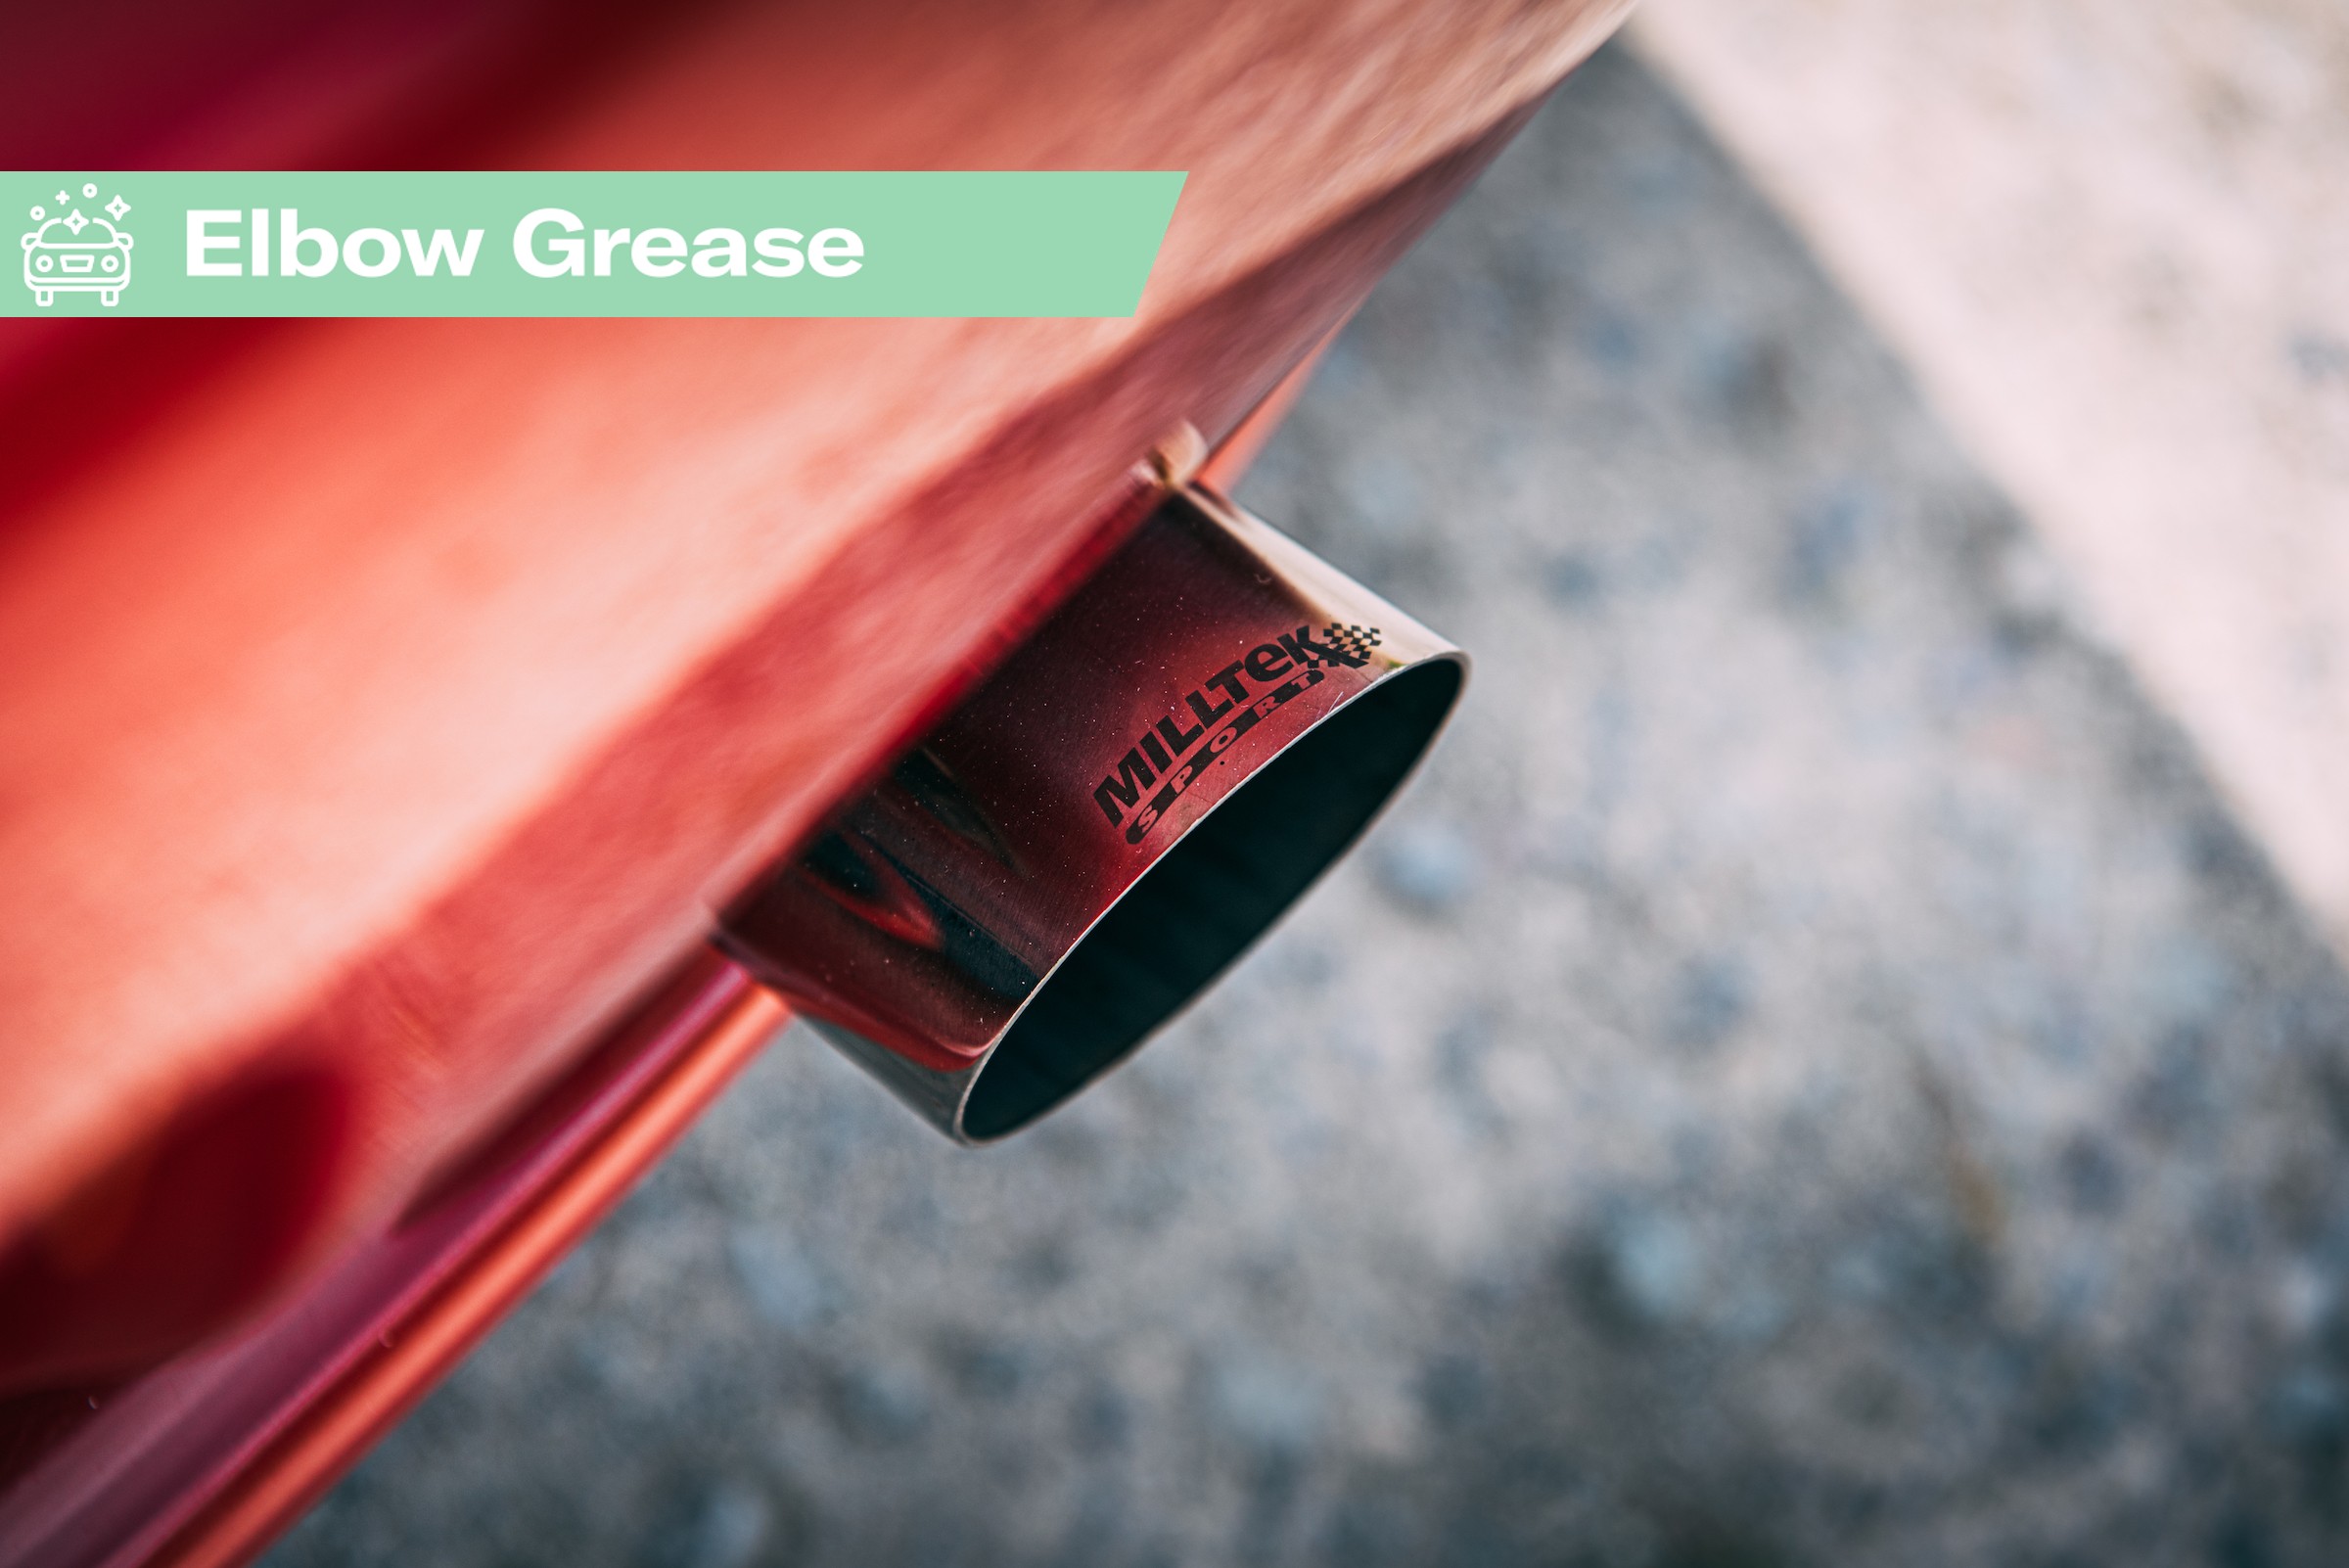 Elbow Grease: Tips for those exhaust tips